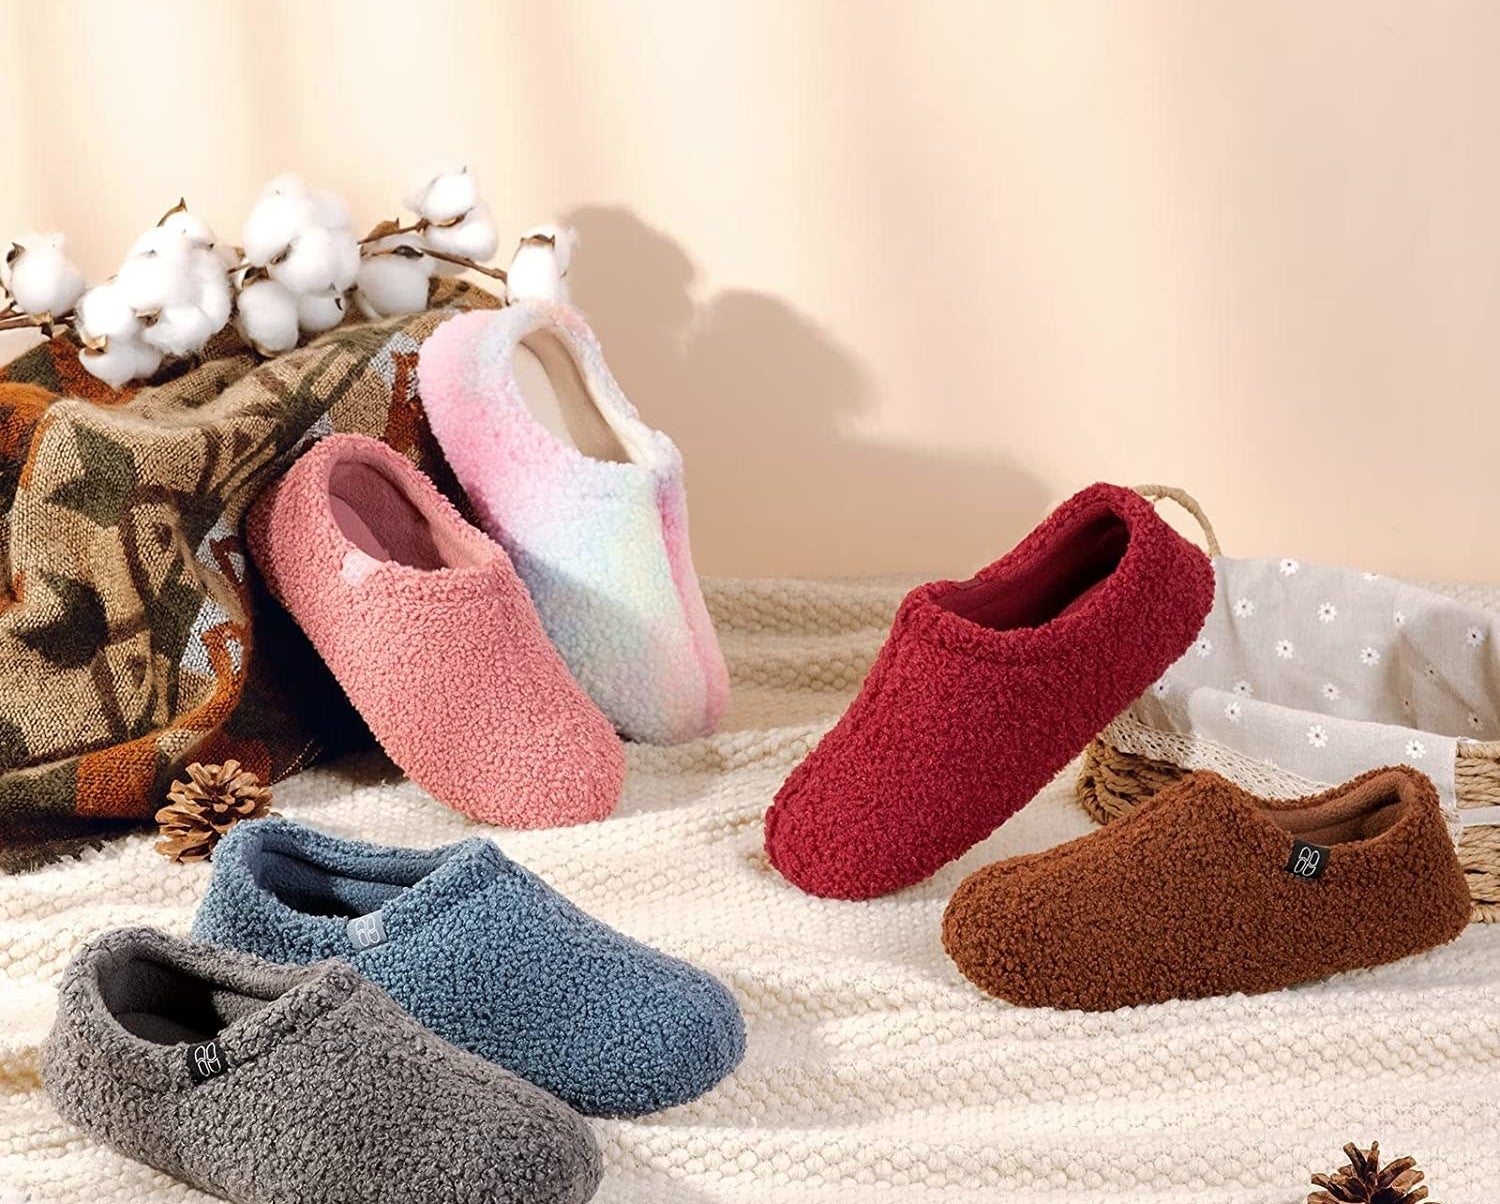 A shot of several of the fuzzy memory foam slippers in different colors